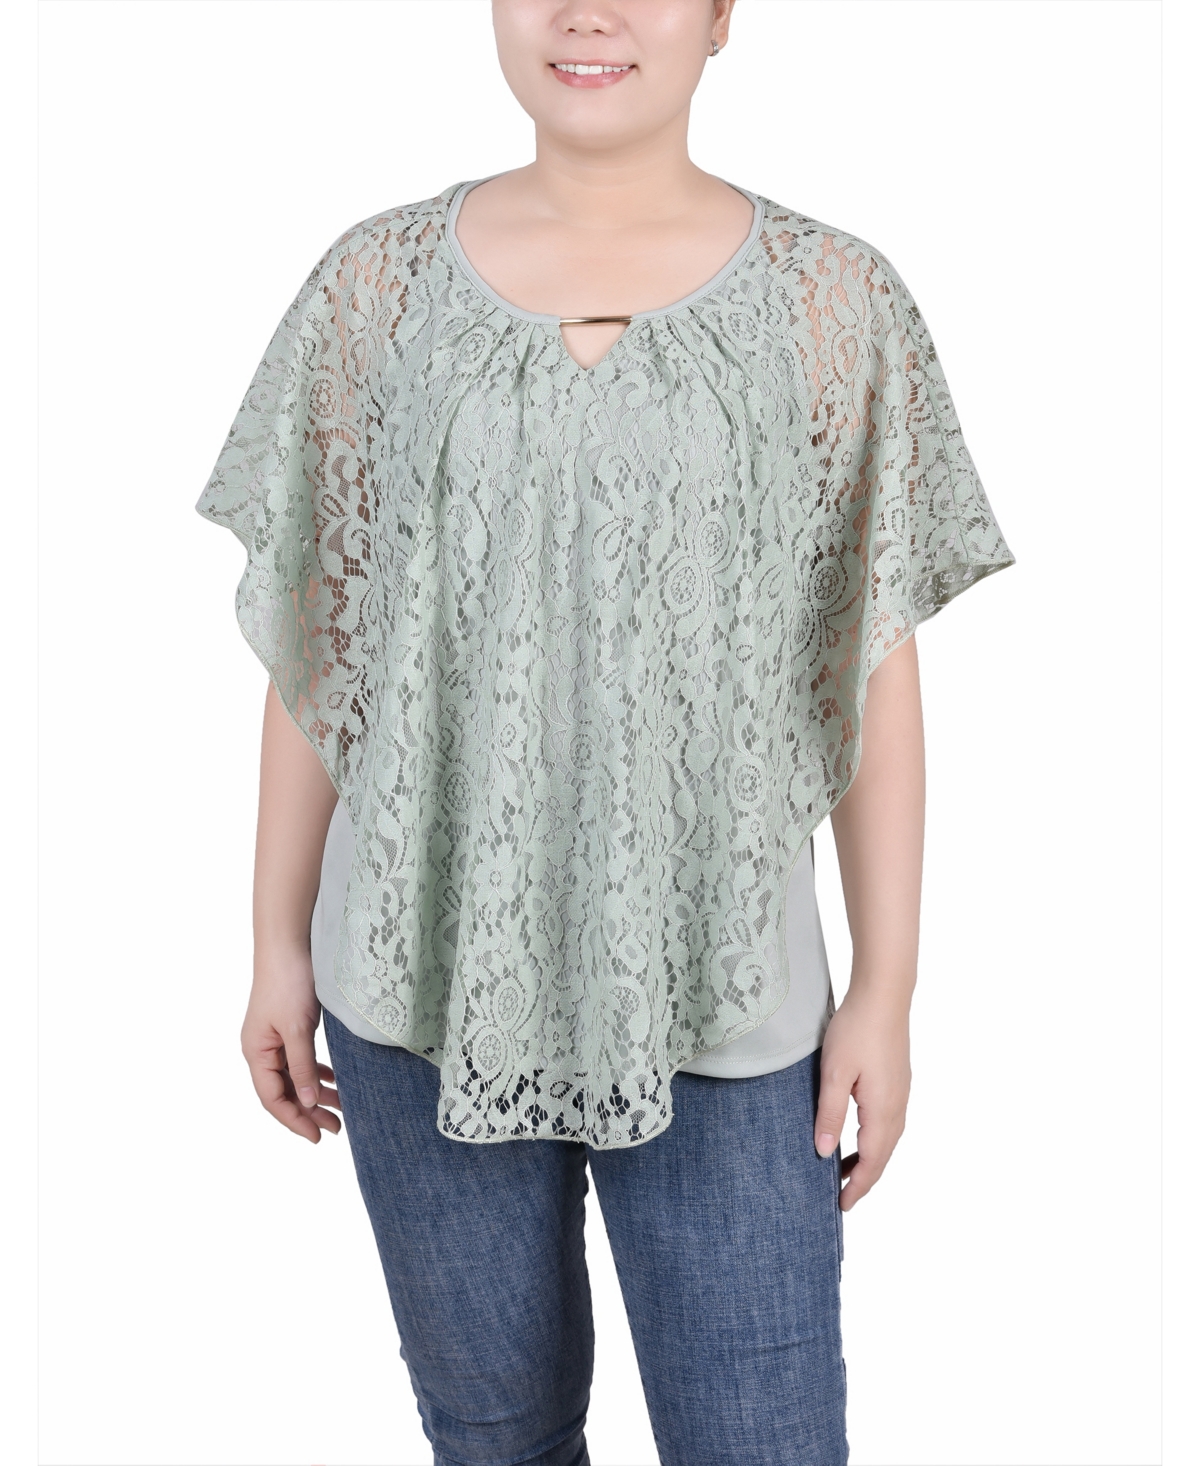 Women's Lace Poncho Top with Bar - Frosty Green